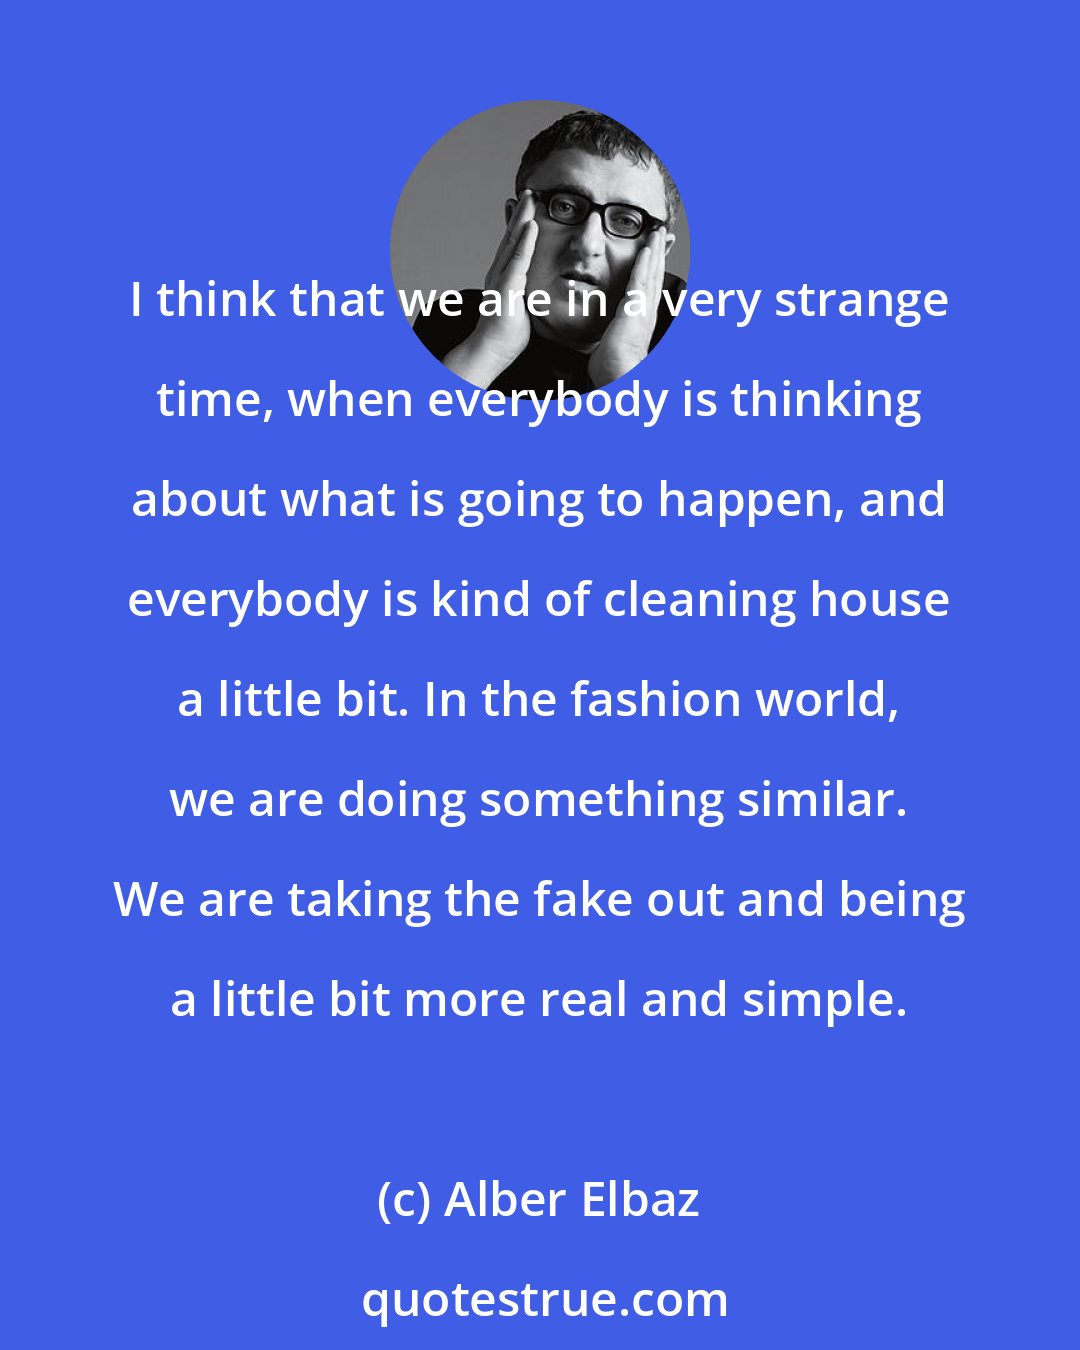 Alber Elbaz: I think that we are in a very strange time, when everybody is thinking about what is going to happen, and everybody is kind of cleaning house a little bit. In the fashion world, we are doing something similar. We are taking the fake out and being a little bit more real and simple.